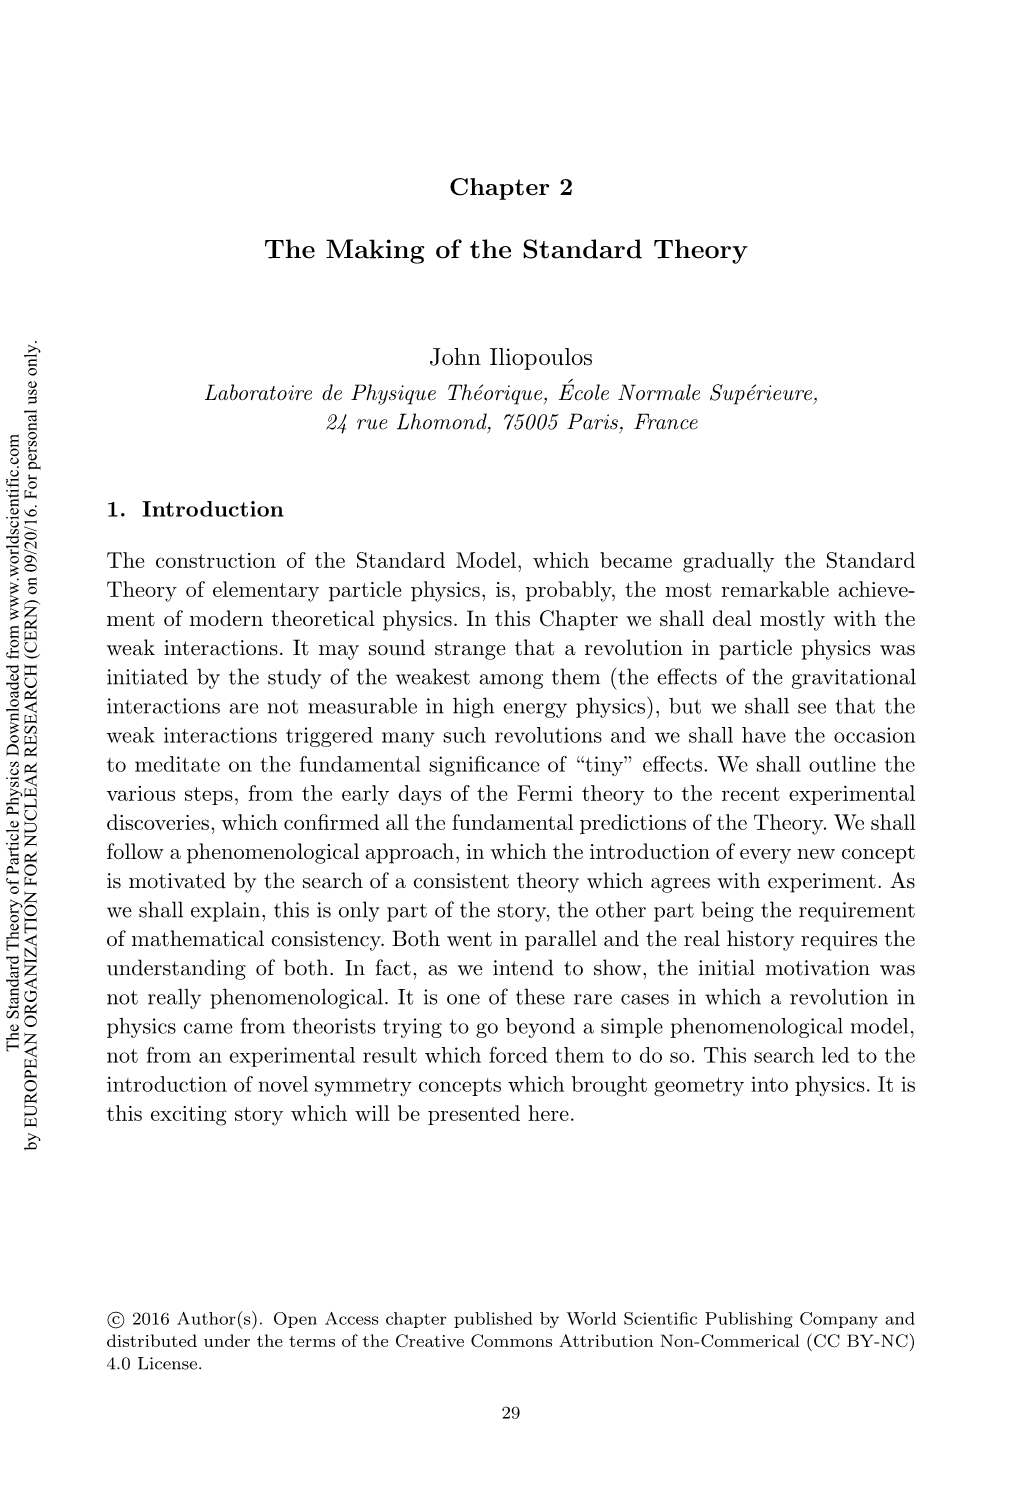 The Making of the Standard Theory